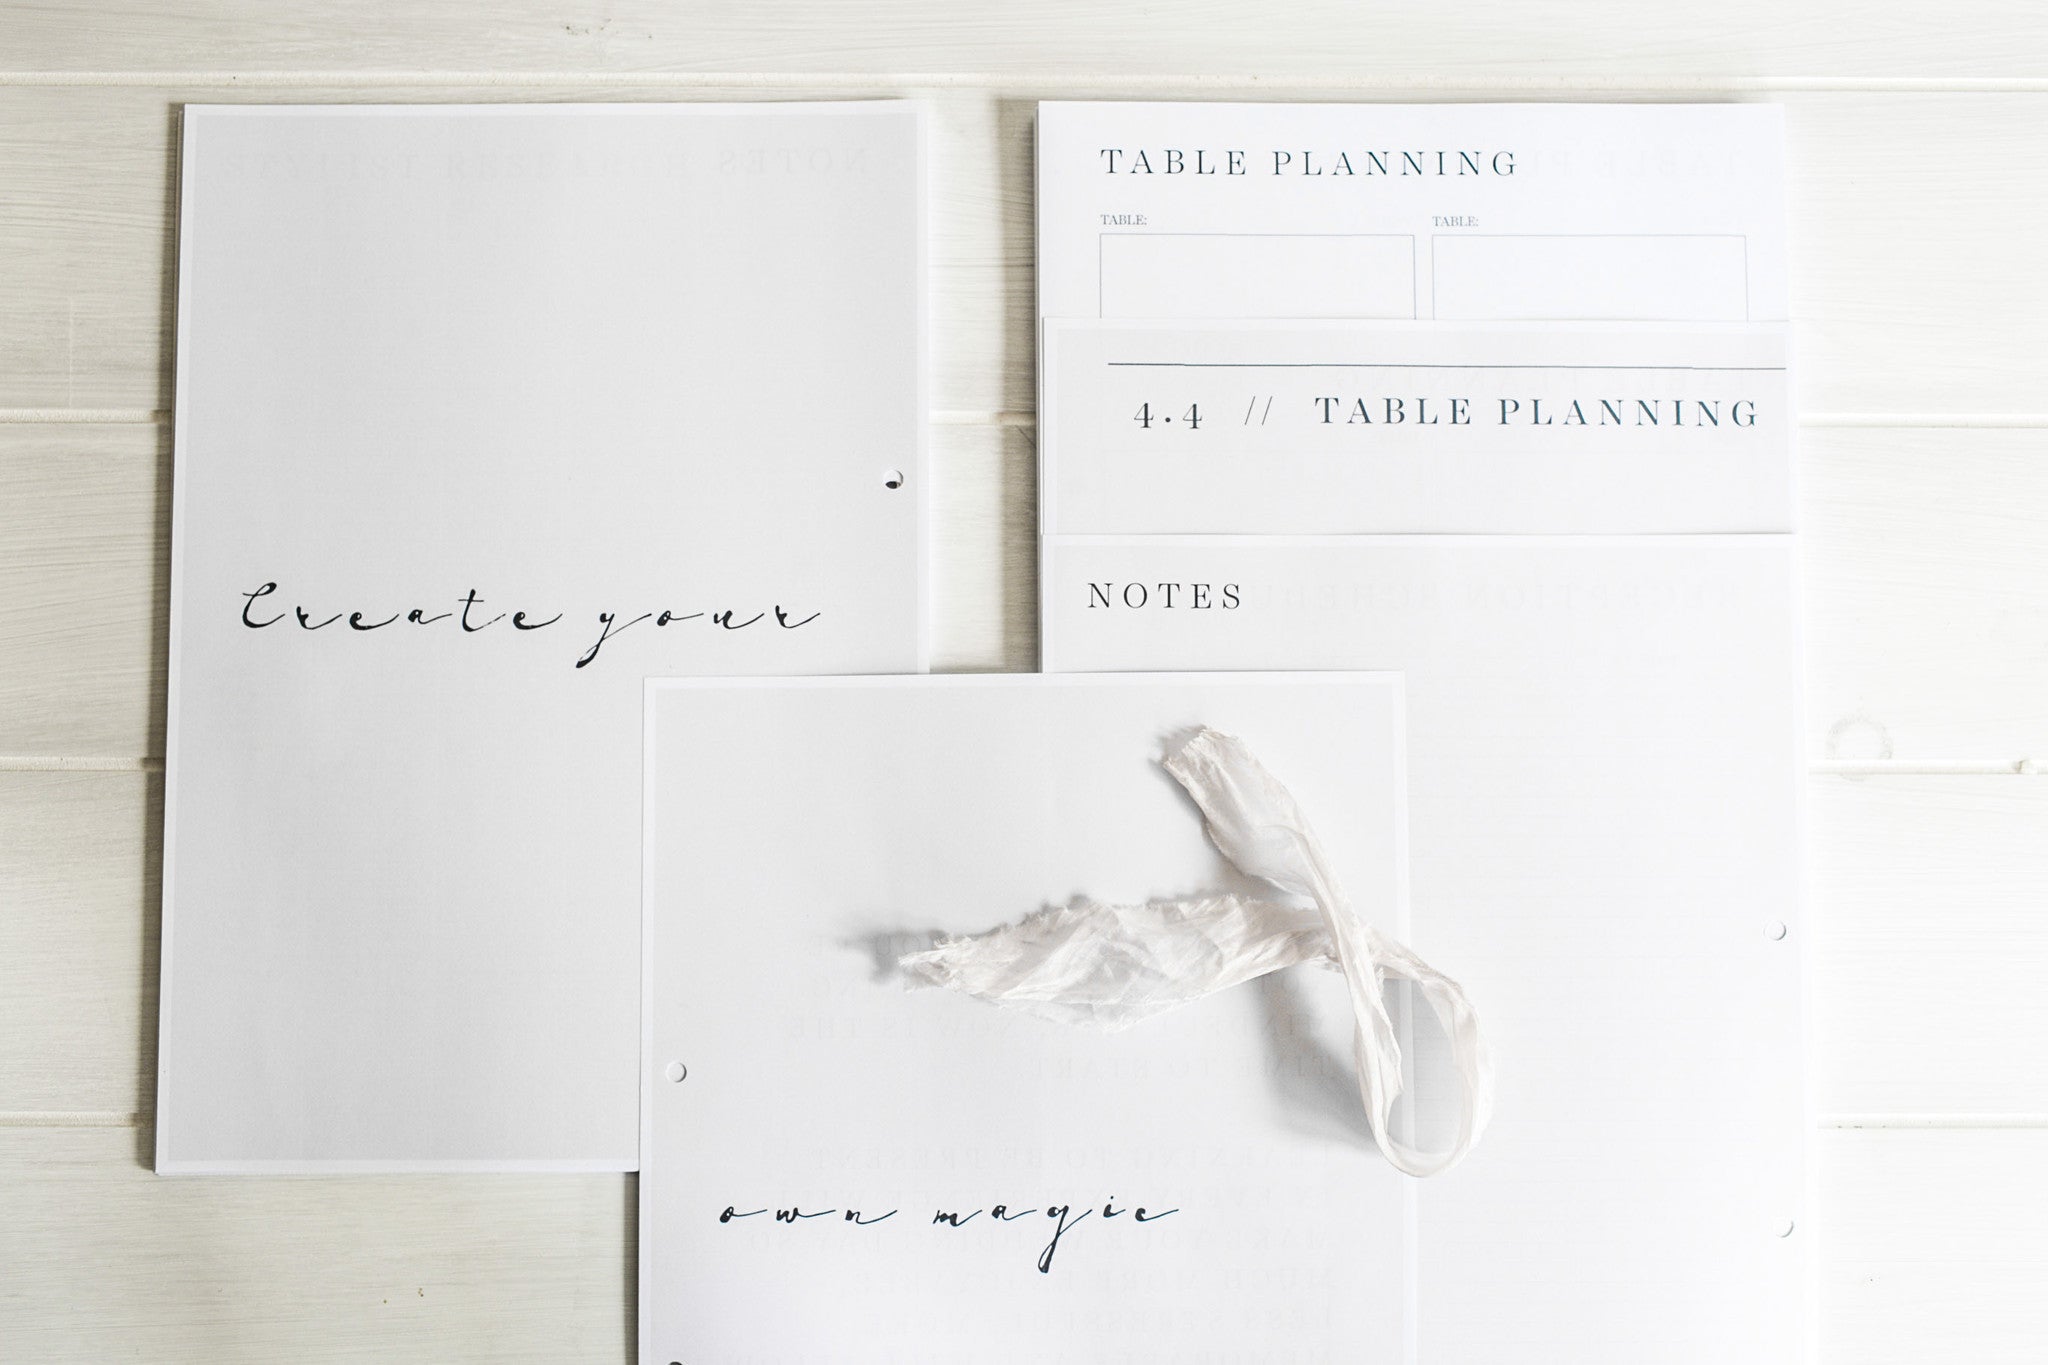 Wedding planning book / Spiral Bound / Wedding Organiser and the perfect engagement gift.